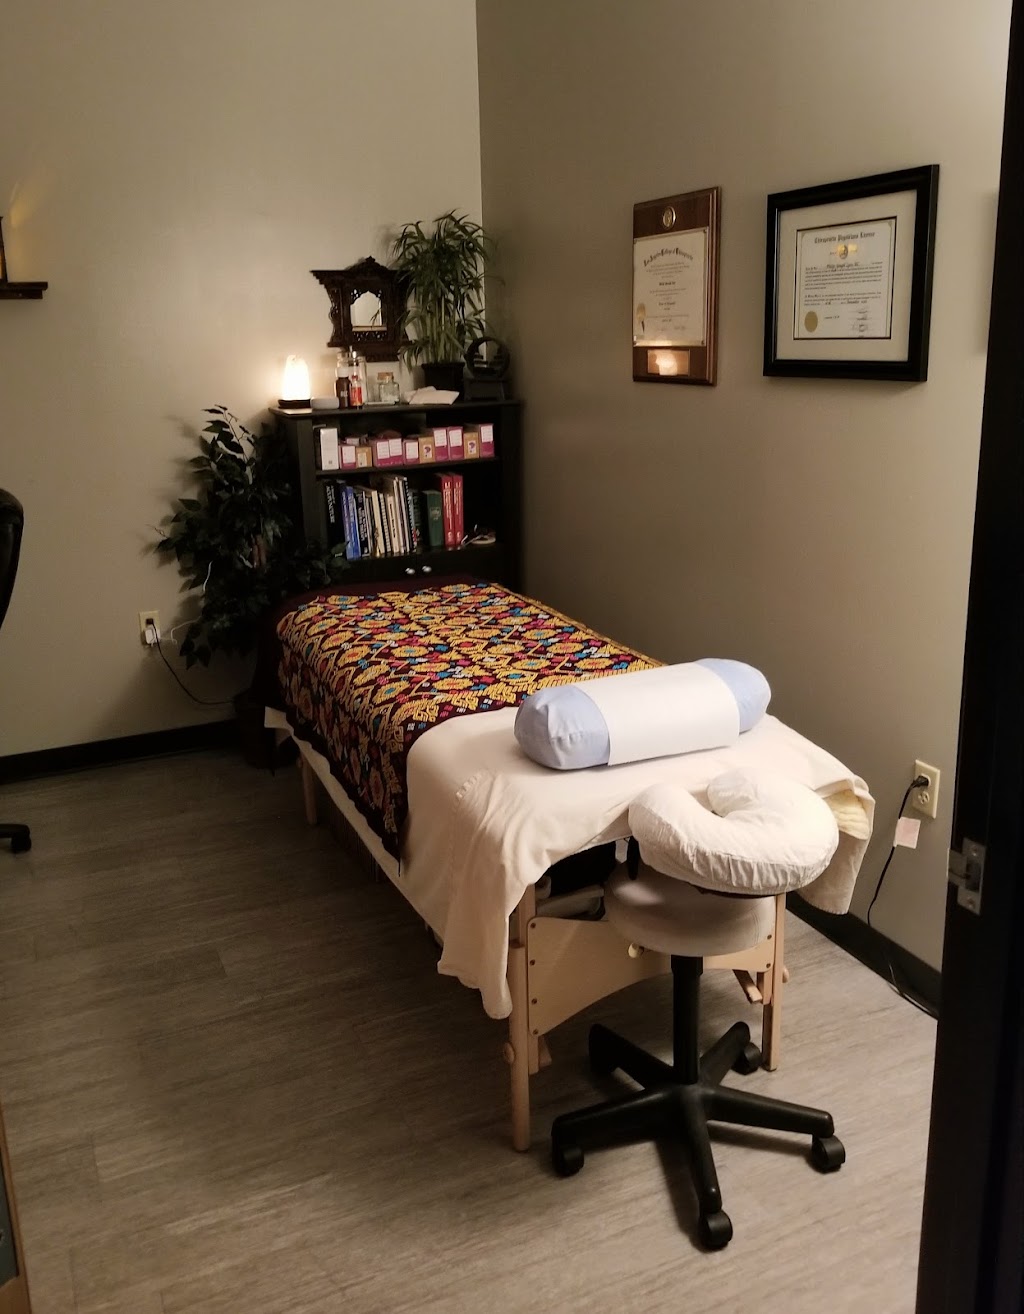 Living Pure Chiropractic and Acupuncture | 17235 N 75th Ave Suite F110, Glendale, AZ 85308 | Phone: (623) 572-4476